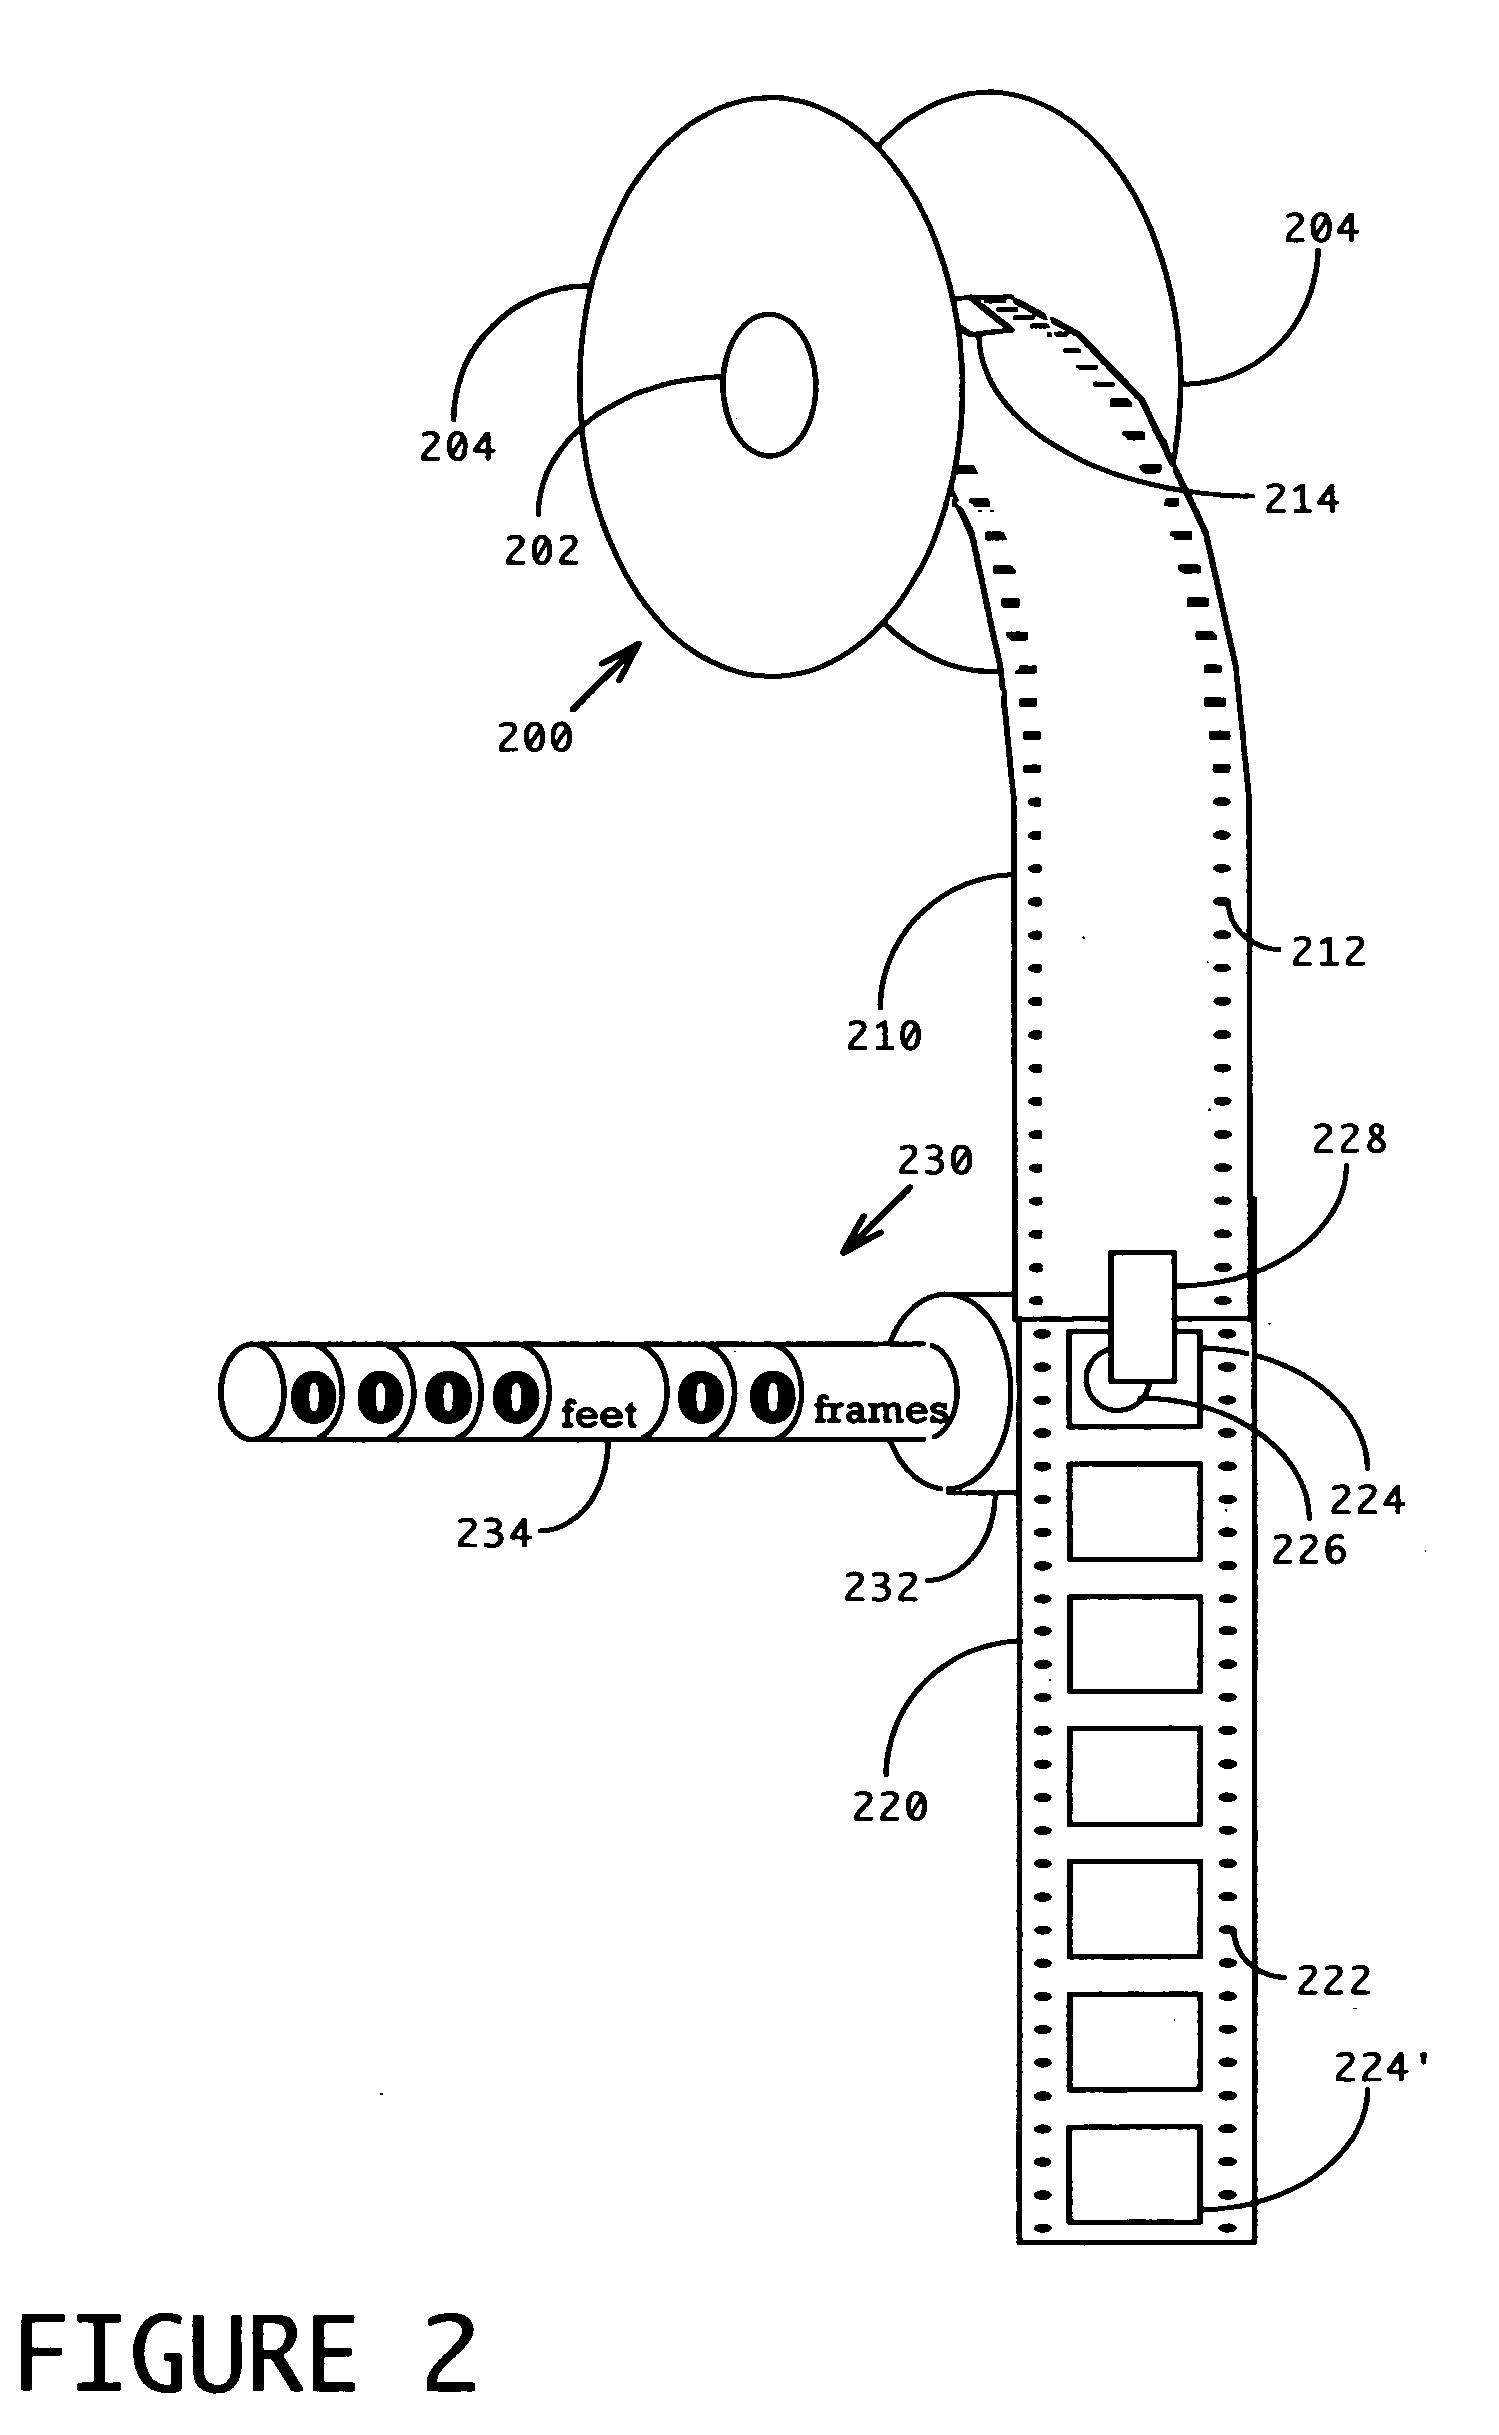 Motion picture asset archive having reduced physical volume and method